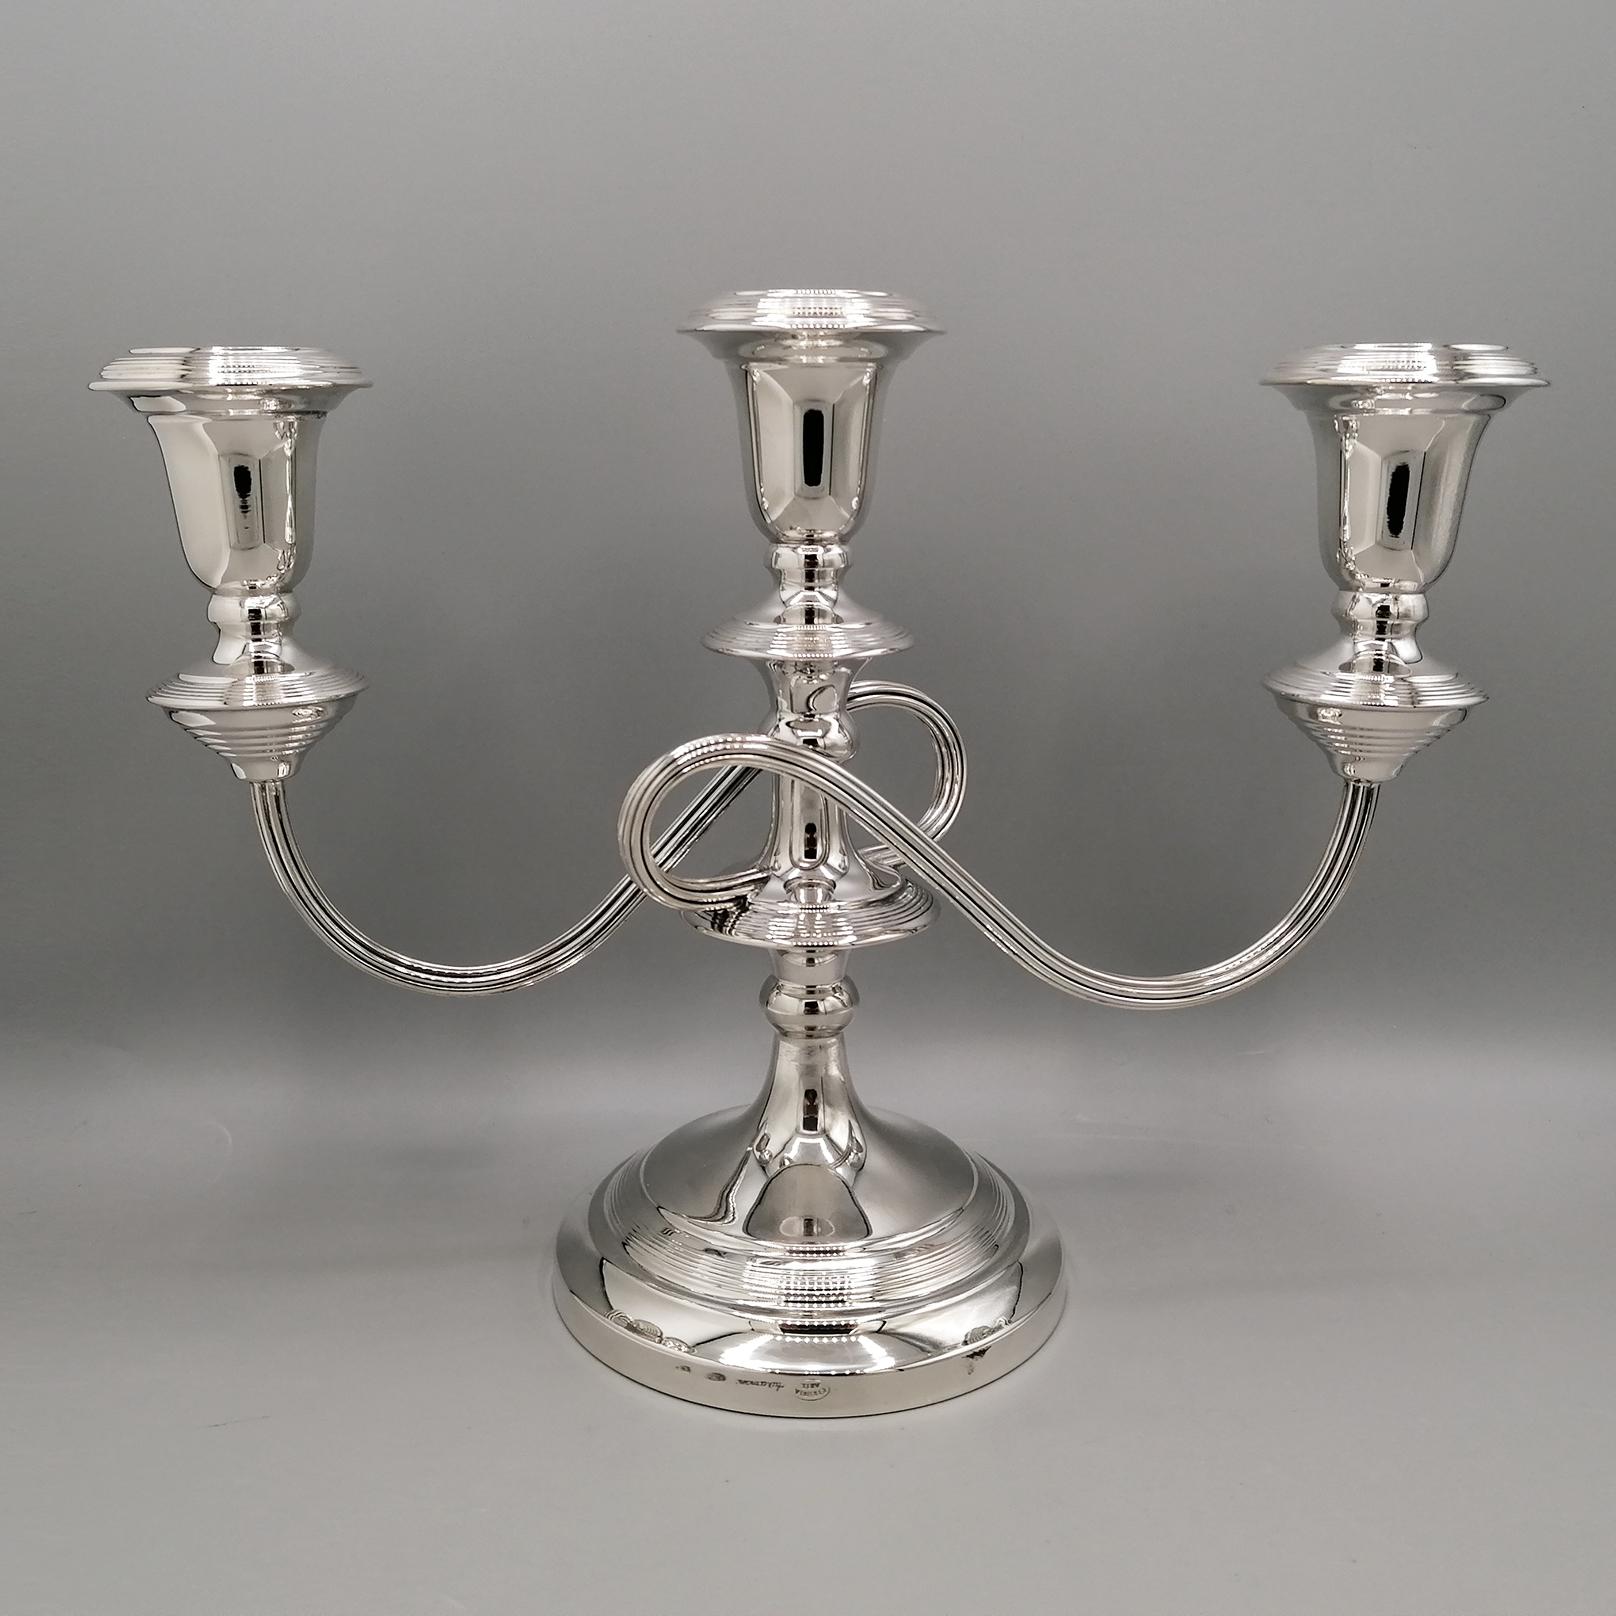 20th Century Italian solid Silver Pr. of Candelabras For Sale 3